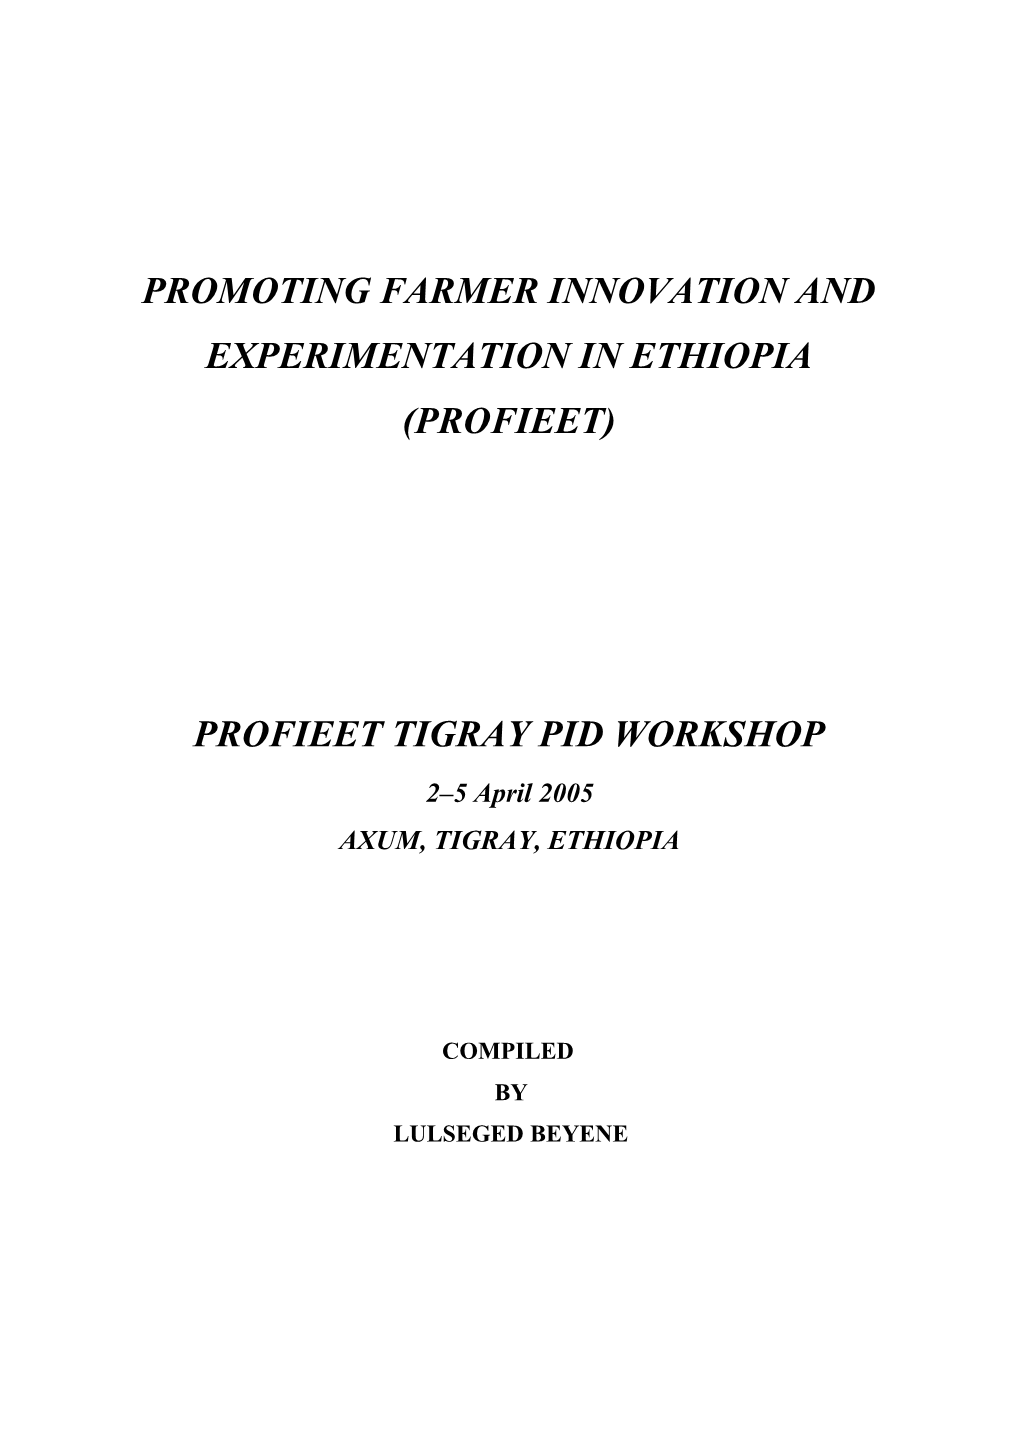 Promoting Farmer Innovation and Experimentation in Ethiopia (Profieet)